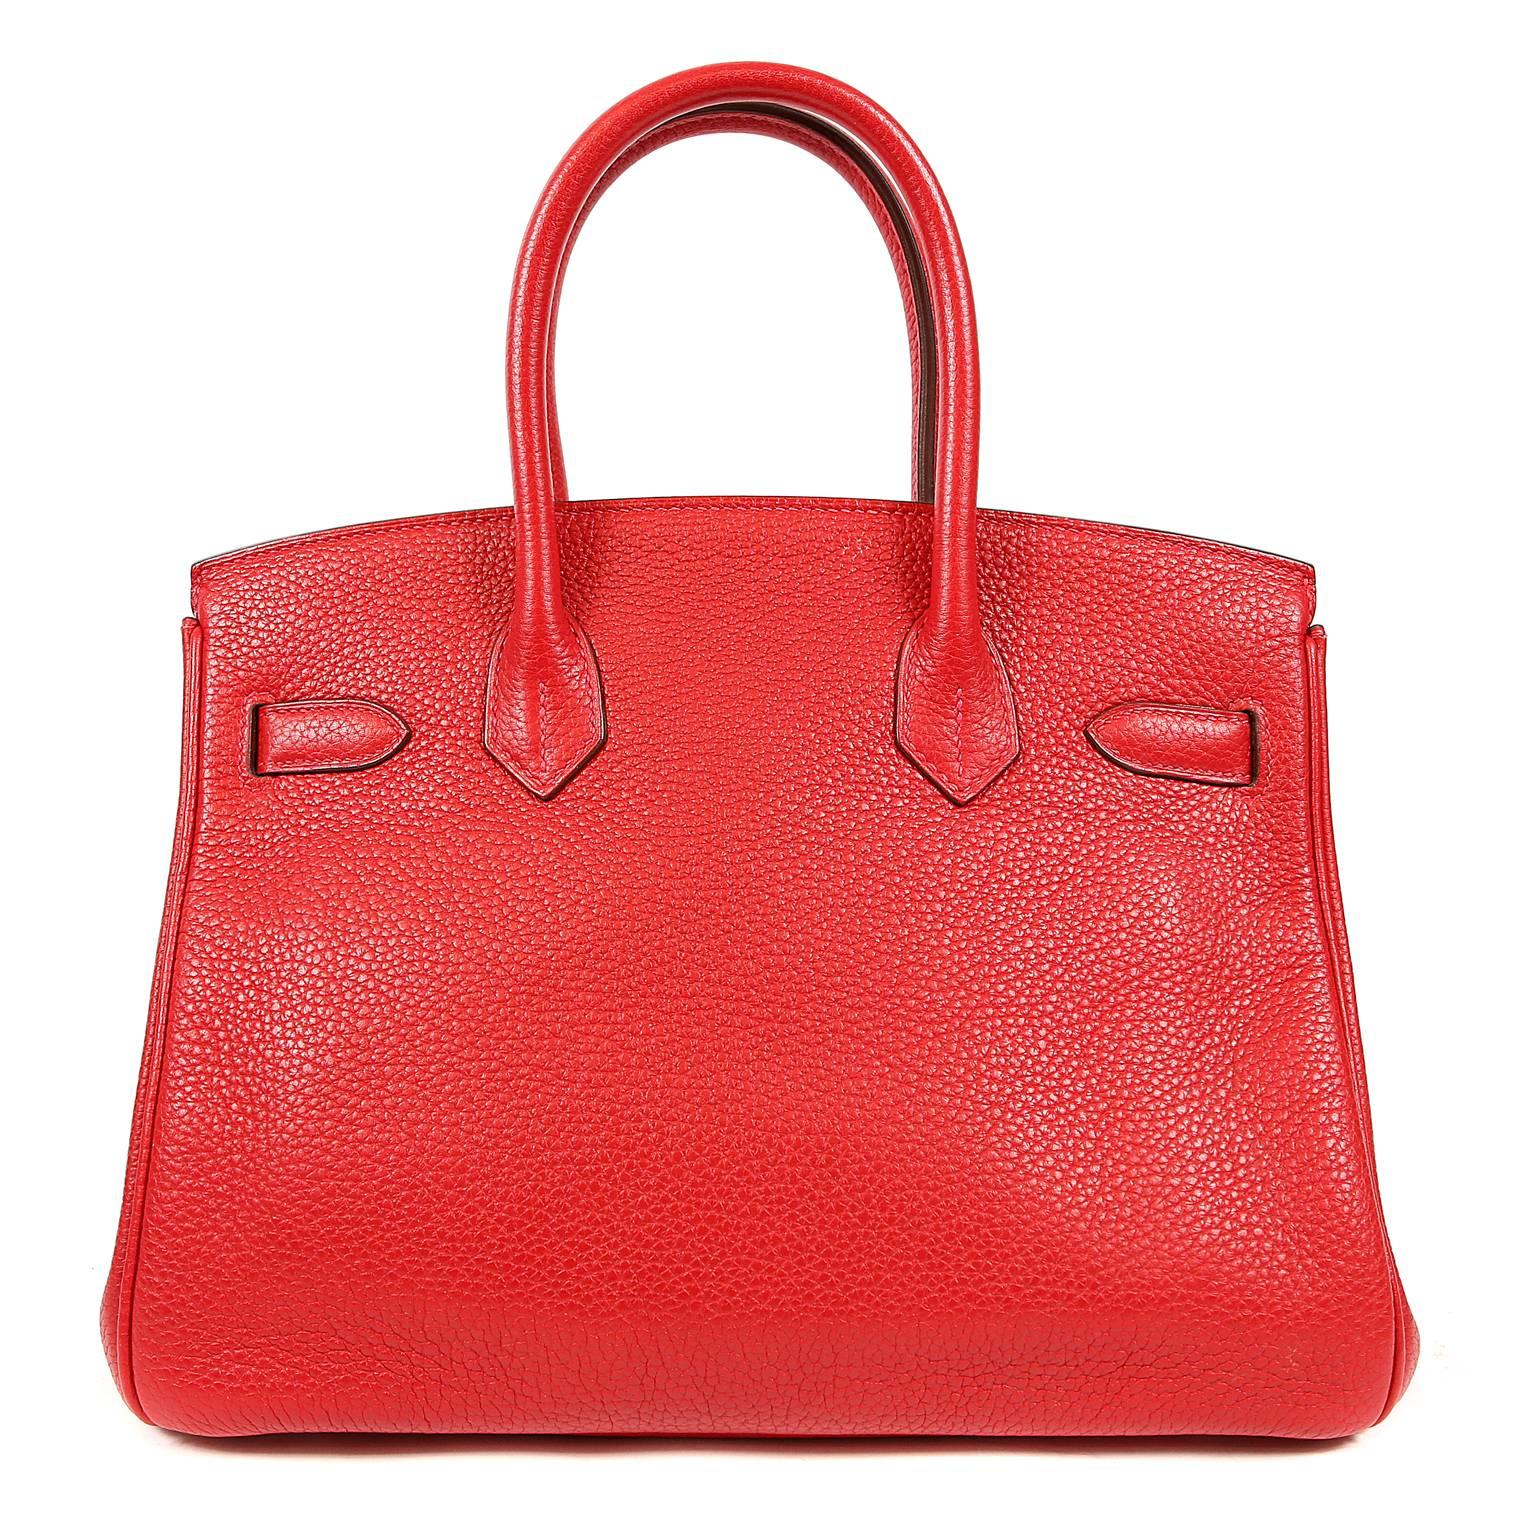 This authentic Hermès Rouge H Togo 30 cm Birkin is pristine. Hand stitched by skilled craftsmen, wait lists of a year or more are not uncommon for the Hermès Birkin. They are considered the ultimate in luxury fashion. Rouge H is a highly desirable